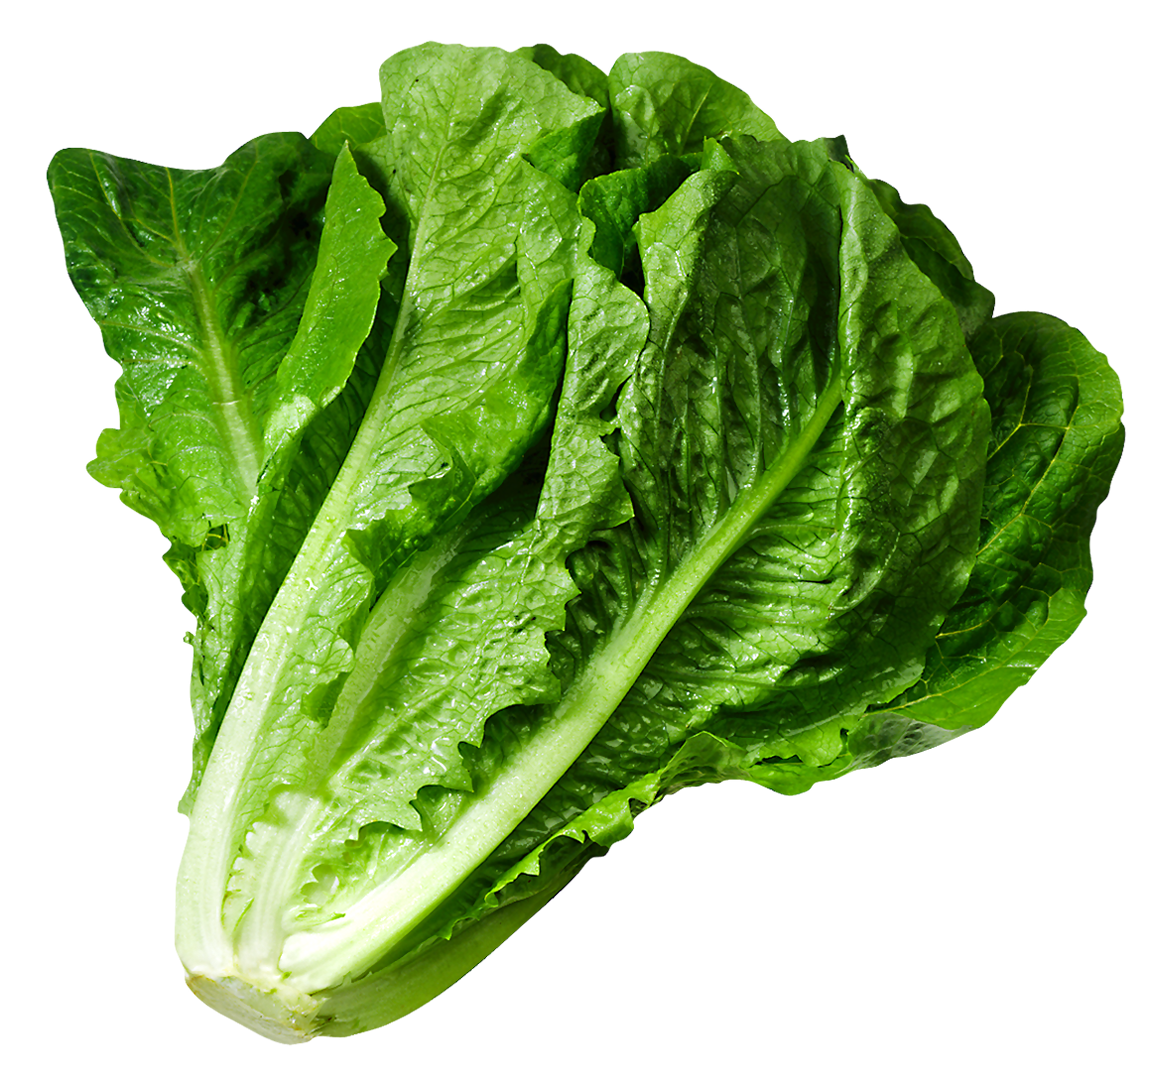 Png picture gallery yopriceville. Lettuce clipart pixel art